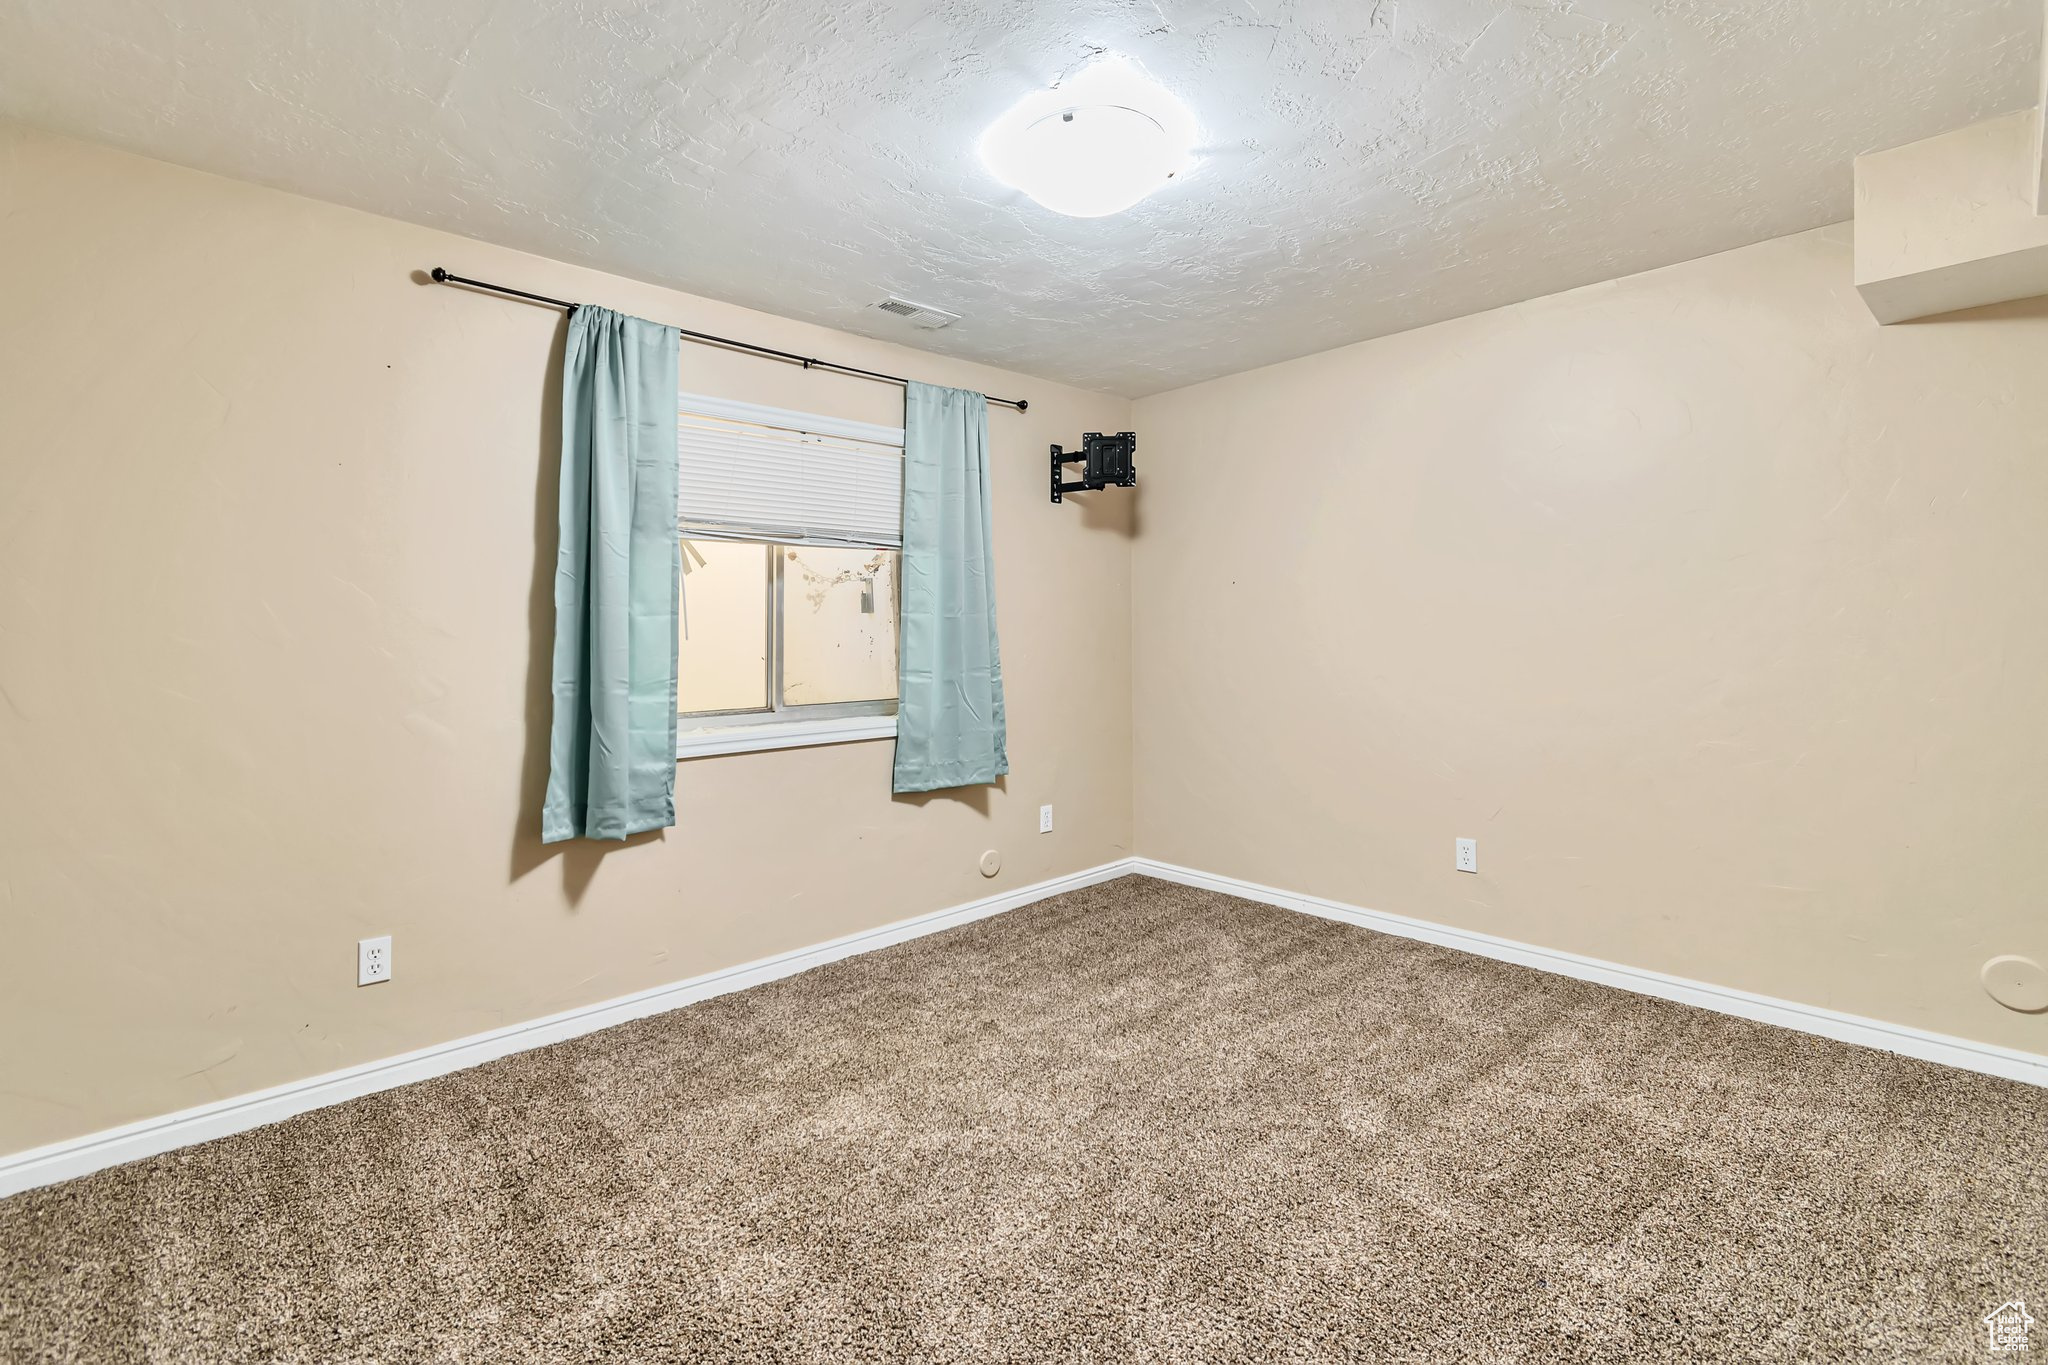 Carpeted room with window, curtains, and TV mount. textured cieling.